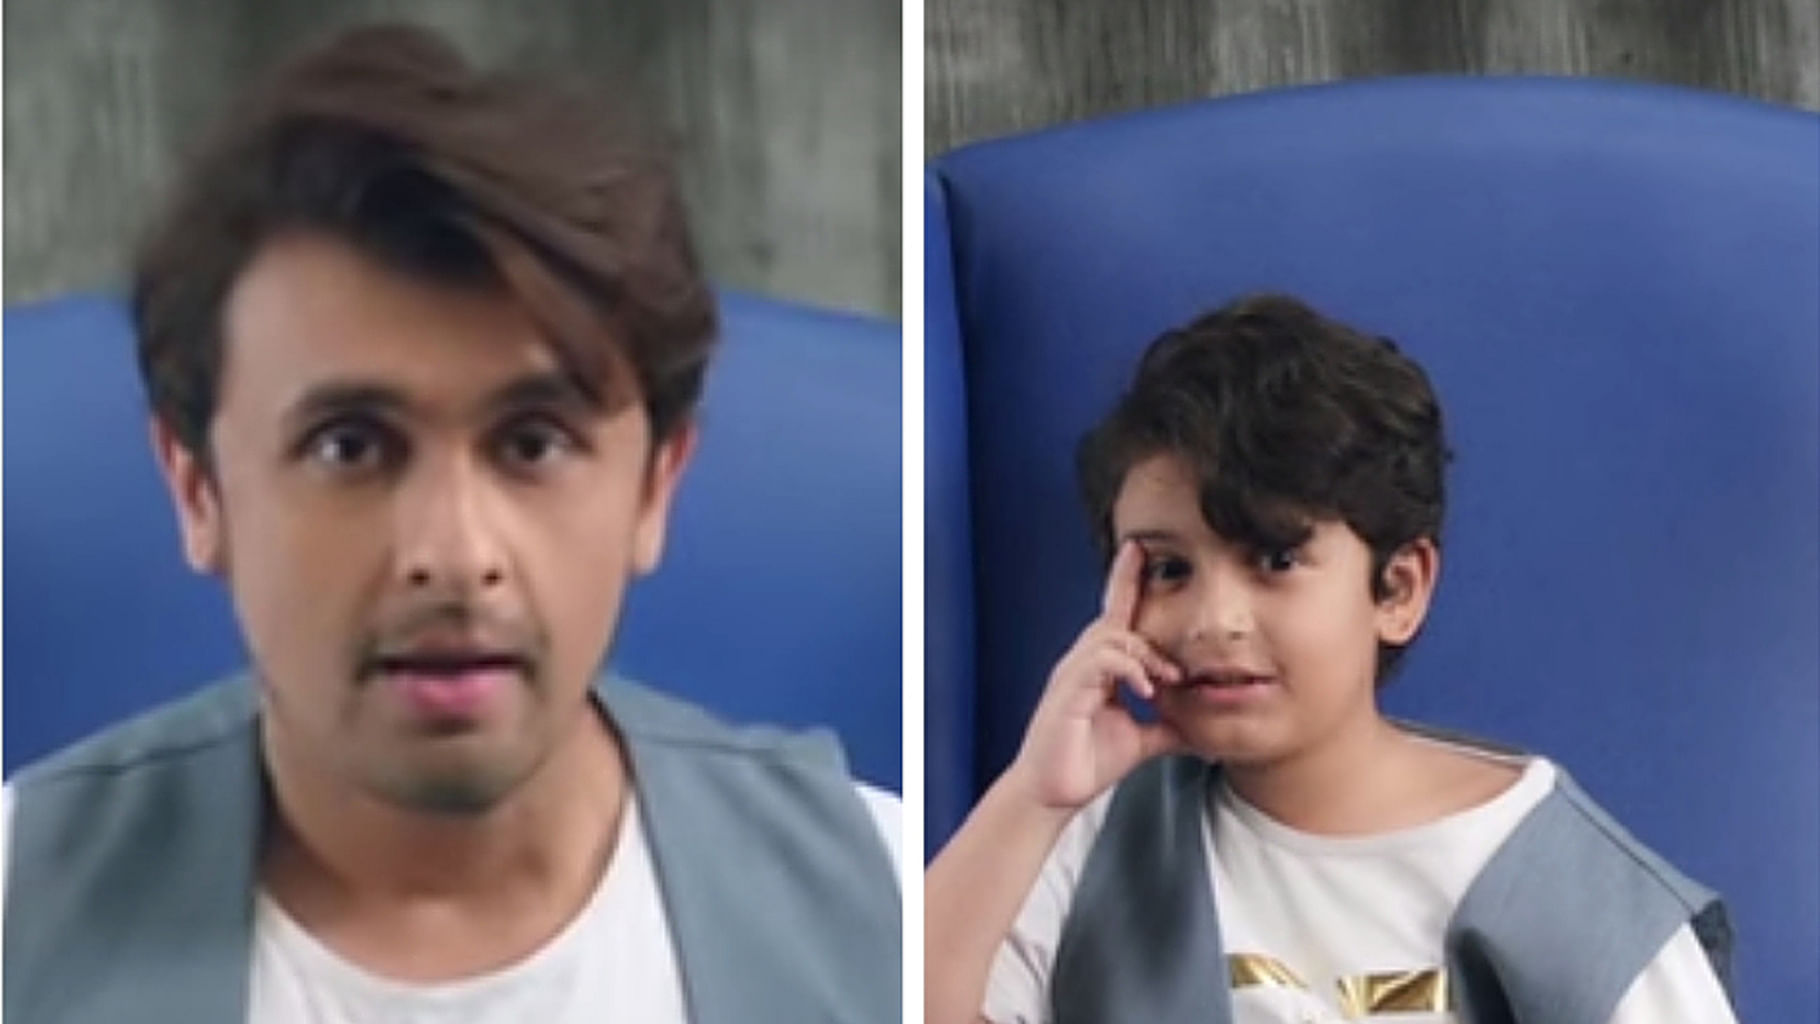 Sonu Nigam shares screen space with his son, Nevaan. (Photo Courtesy: YouTube/<a href="https://www.youtube.com/watch?v=3ji-MBjMz0o&amp;feature=youtu.be">Sonu Nigam</a>)